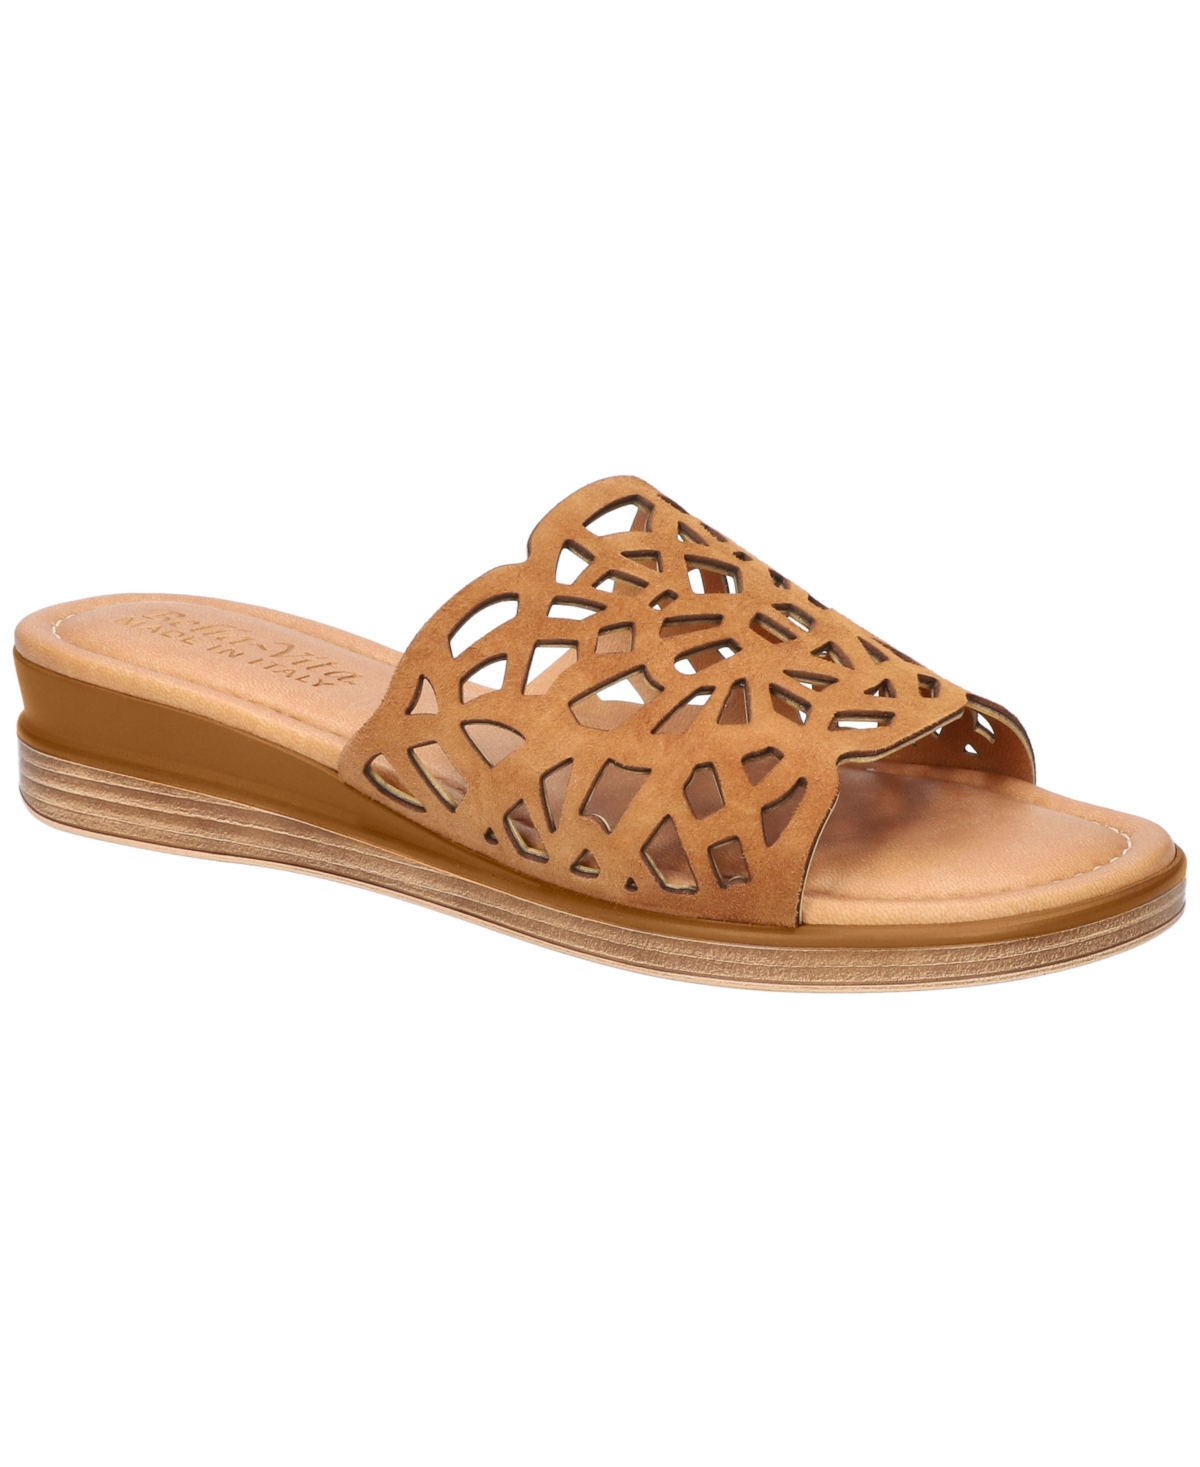 Shop Bella Vita Women's Italy Cas-italy Italy Slide Sandals In Whiskey Kidsuede Italian Leather